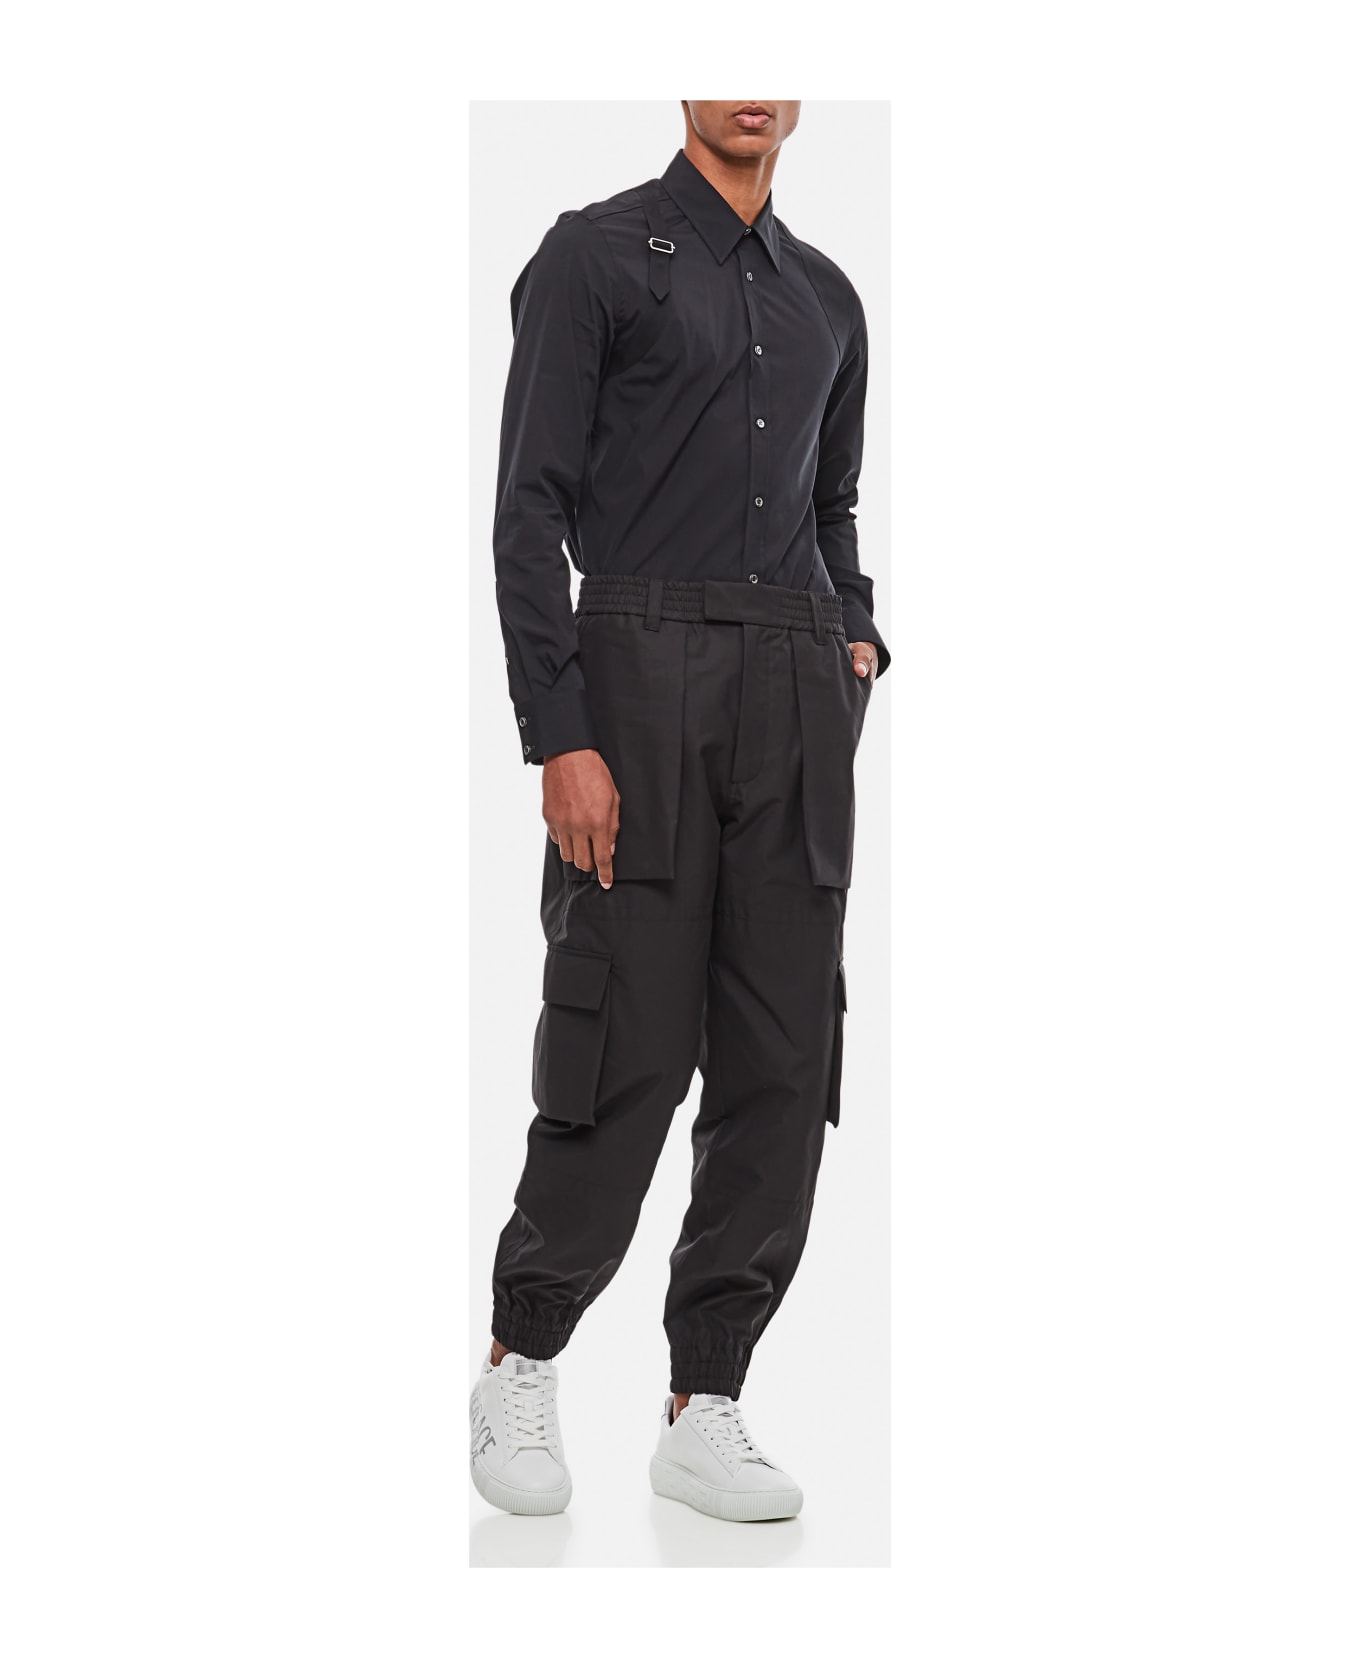 Alexander McQueen Cargo Pants With Maxi Patch Pockets - Black スウェットパンツ